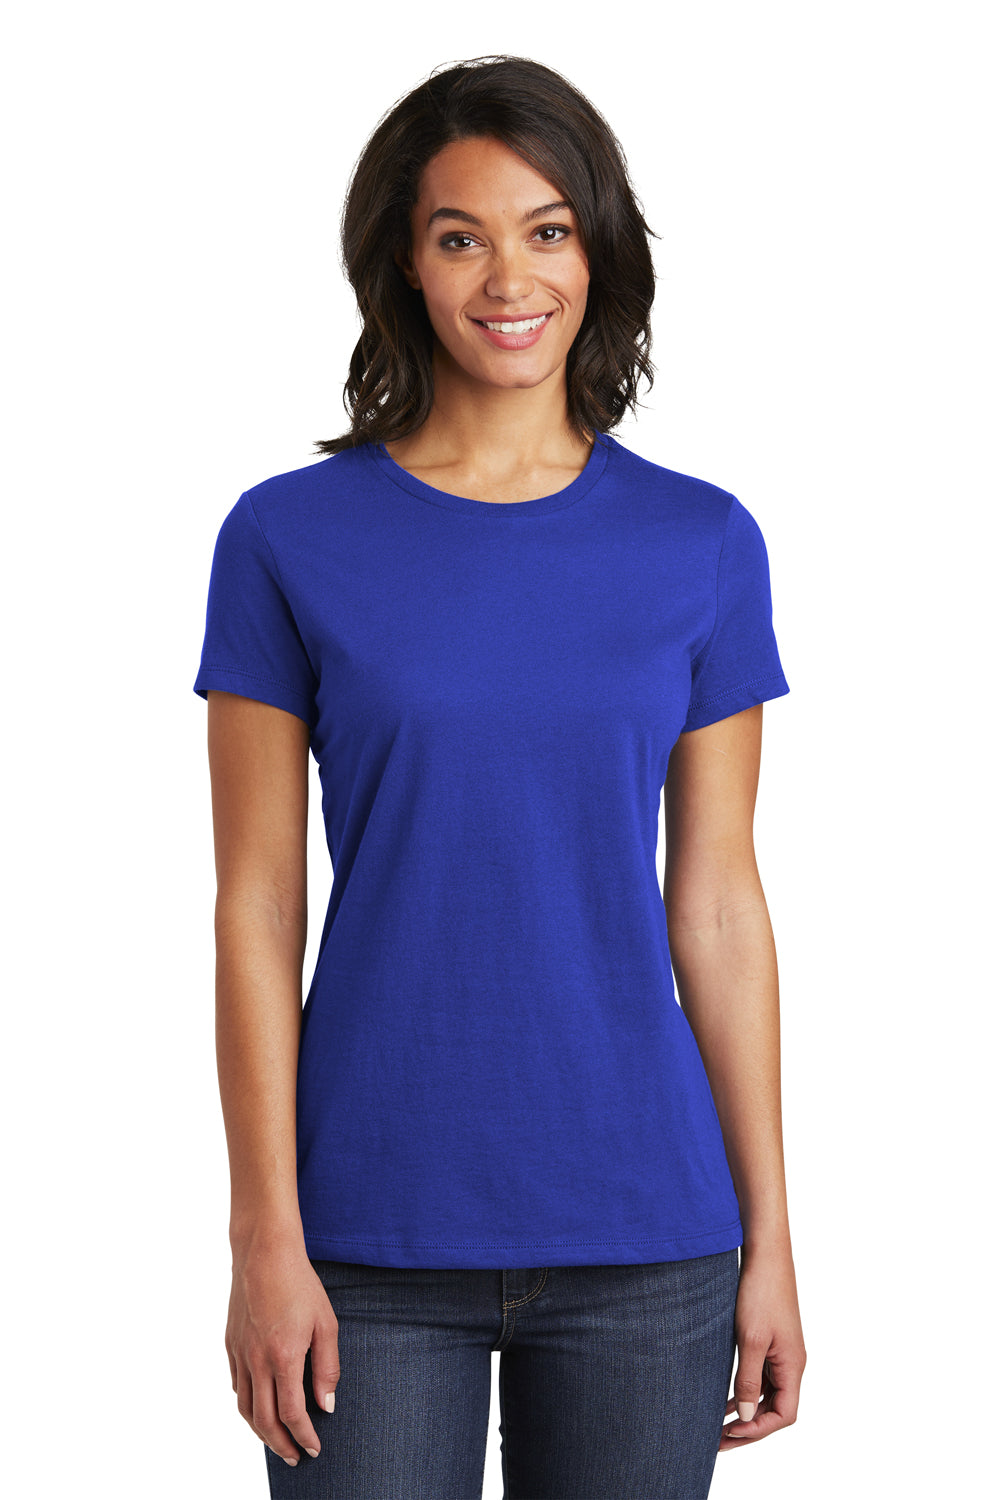 District DT6002 Womens Very Important Short Sleeve Crewneck T-Shirt Royal Blue Front